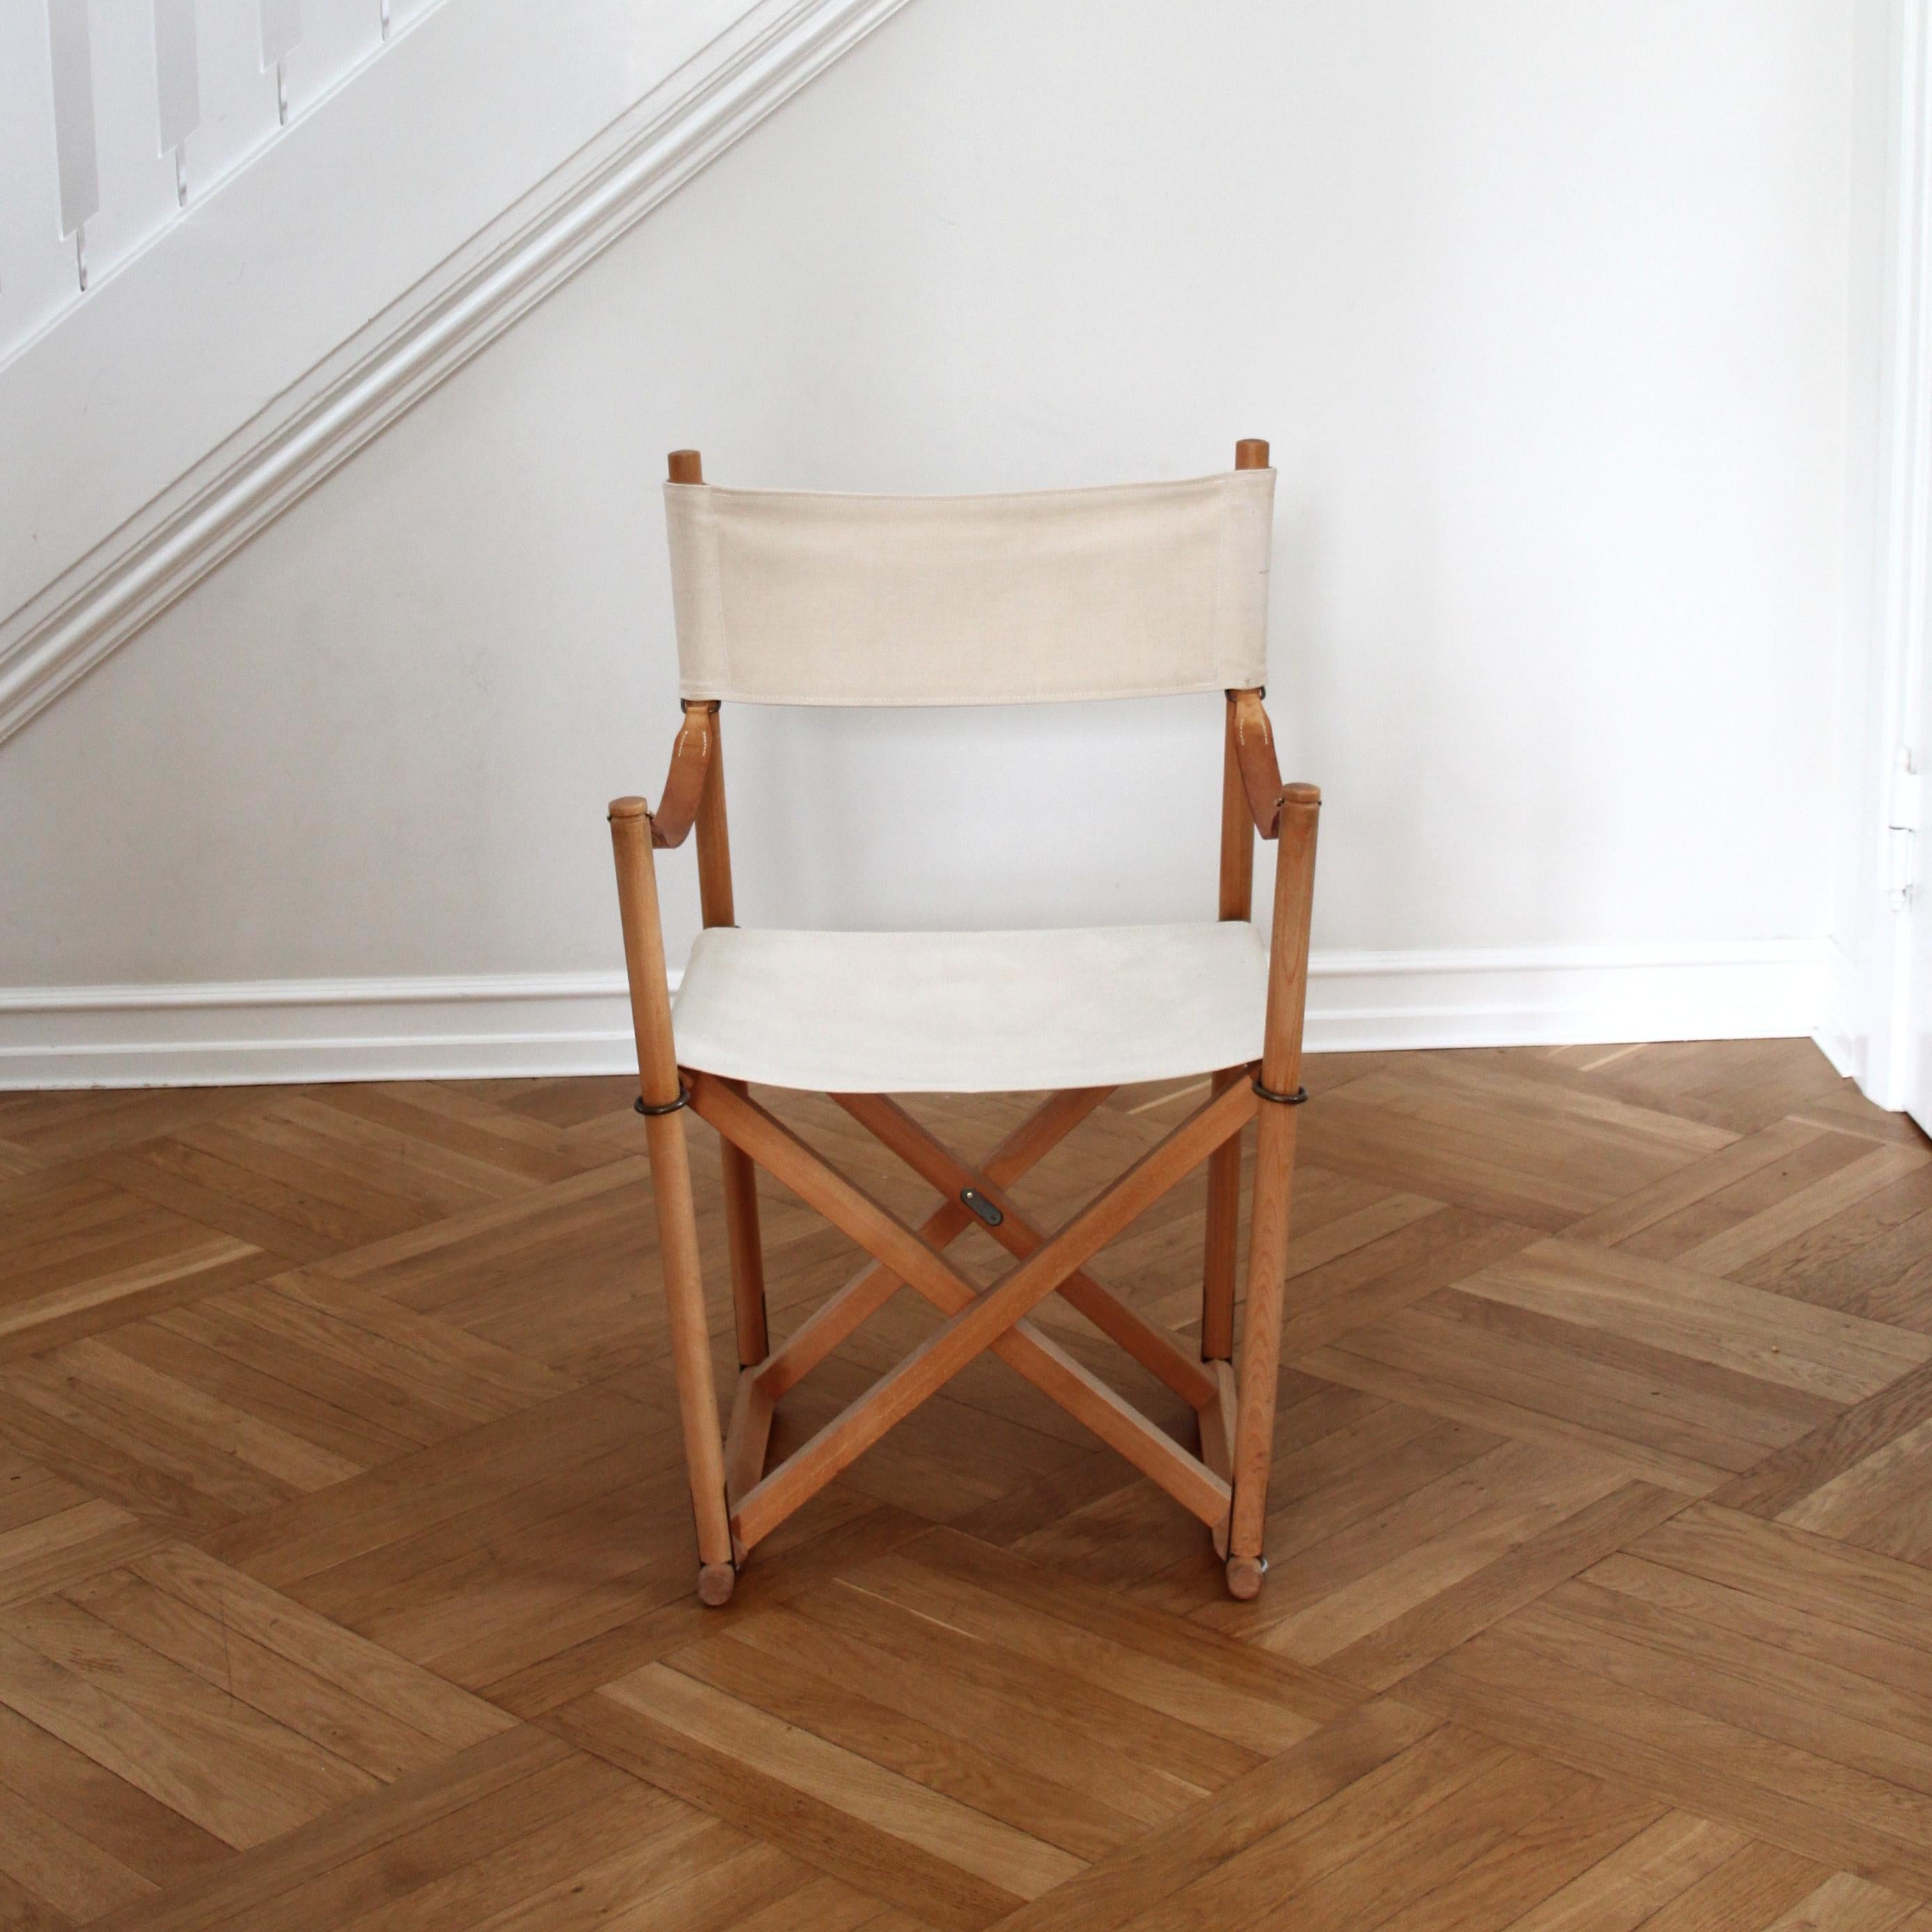 Mogens Koch & Rud Rasmussen

Scandinavian Modern

A beautiful beech and canvas folding chairs by Mogens Koch for Rud Rasmussen, Denmark, 1950s. 

Designed in 1931.

Natural linen canvas sling seats and backs with full-grain leather straps